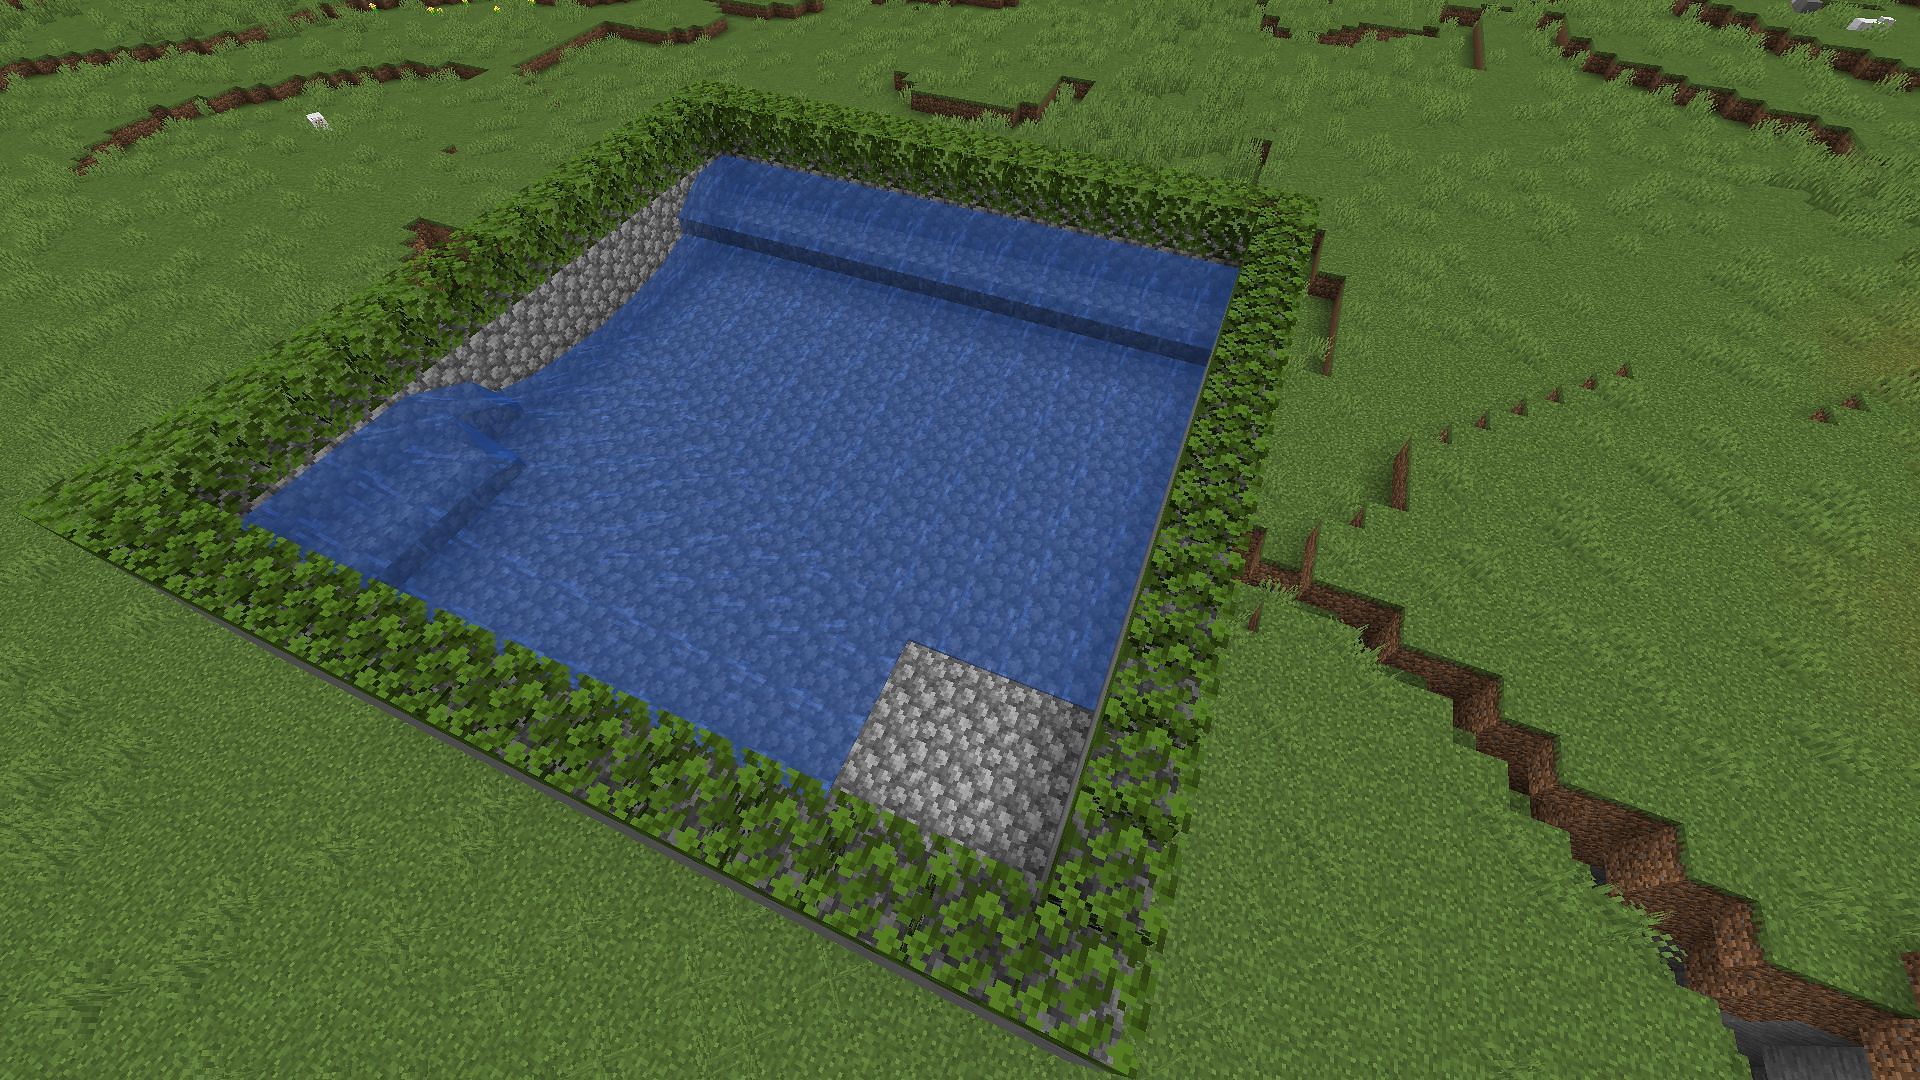 The platform with the water added (Image via Minecraft)